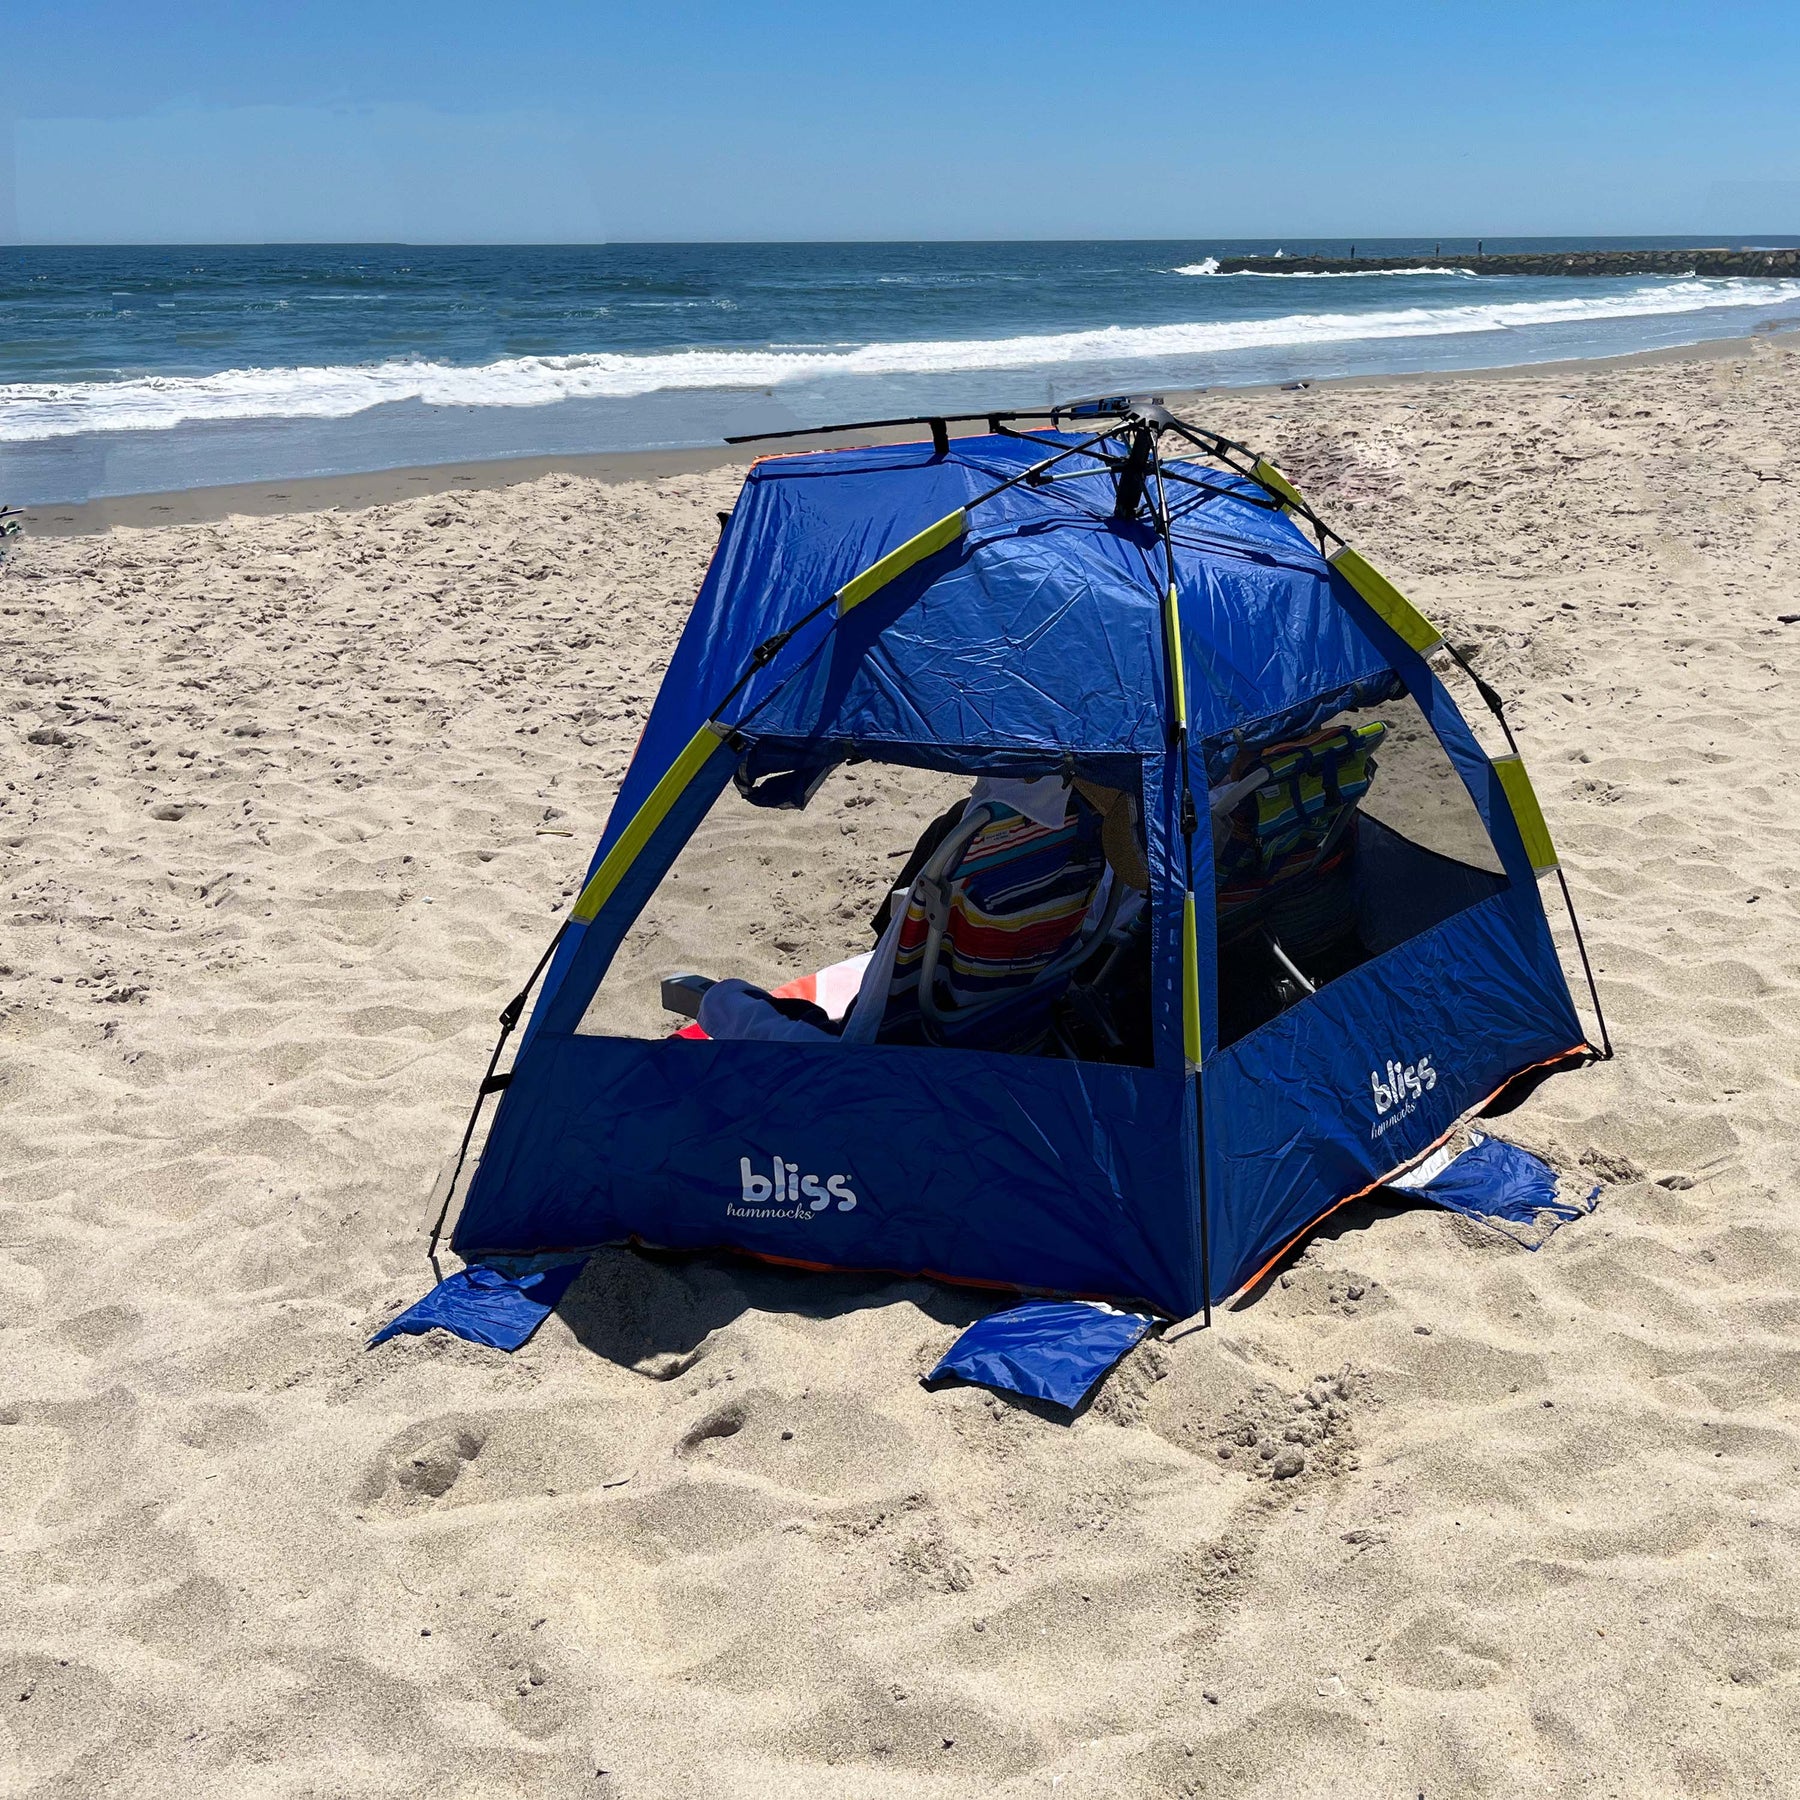 Bliss Hammocks Pop-Up Beach Tent with a collapsible design assembled on the beach with chairs inside and the ocean in the background.